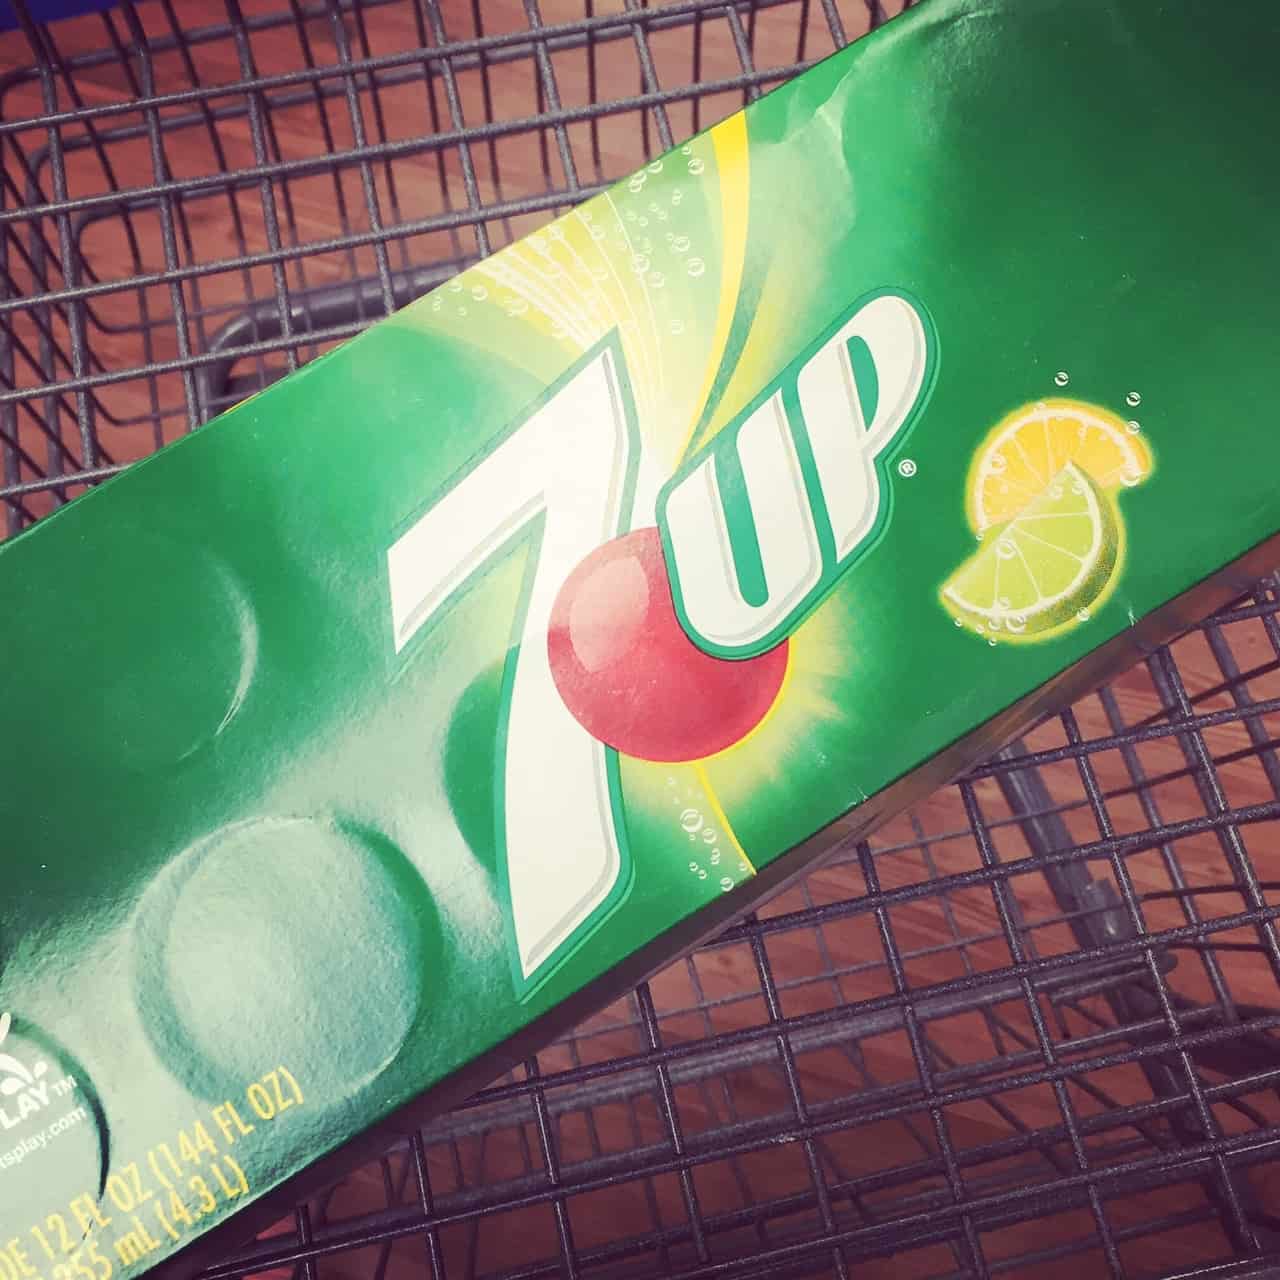 A large box of 7UP soda in a shopping cart